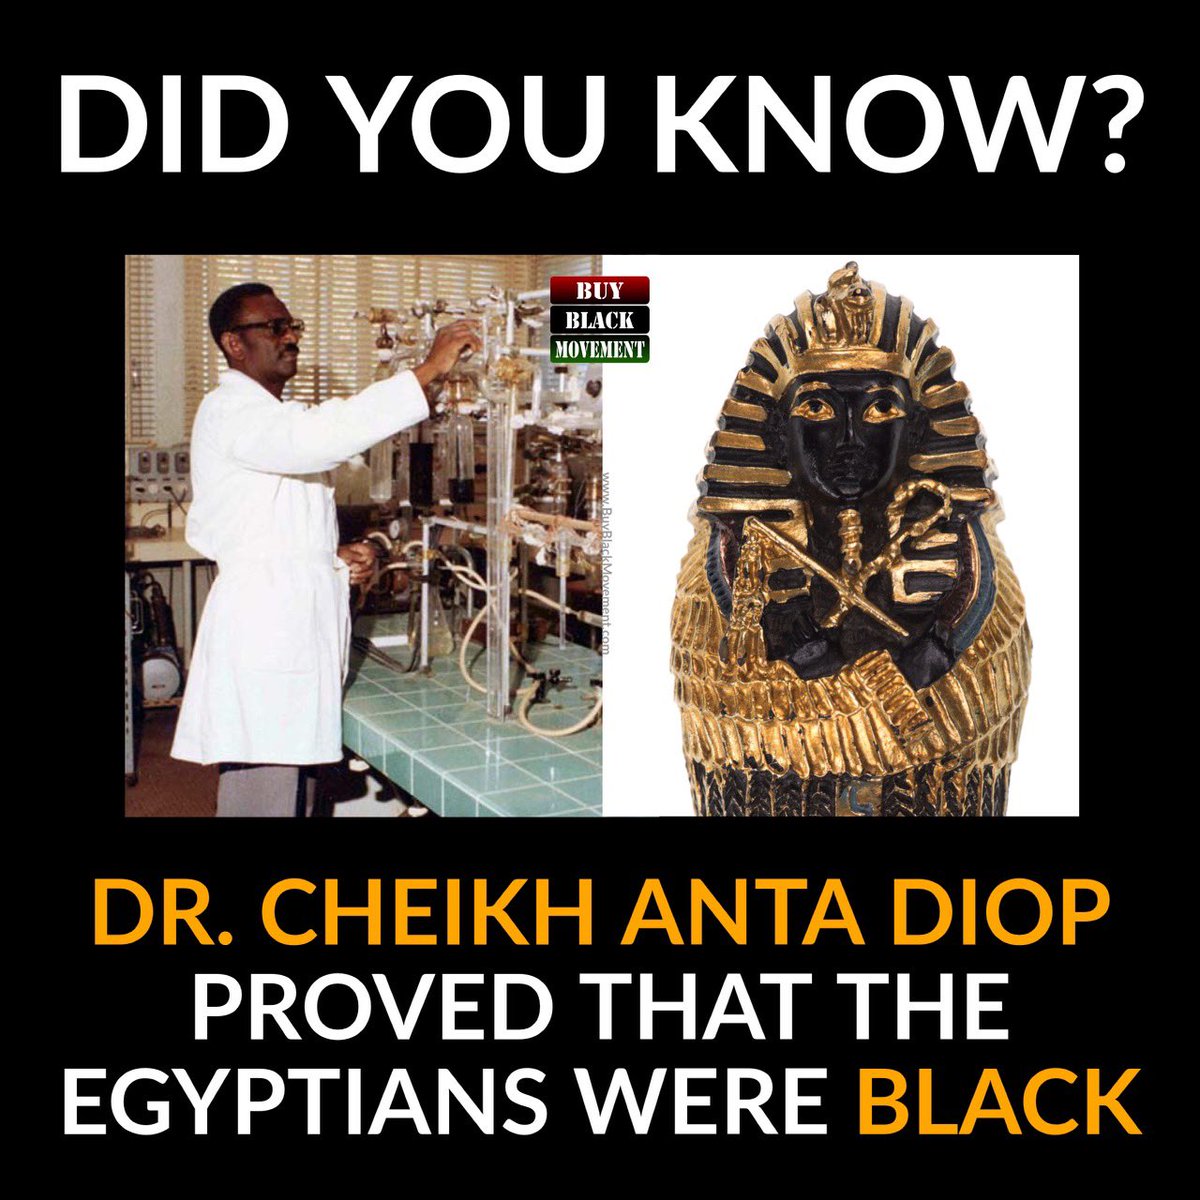 Did you know? Cheikh A. Diop was a great contributor to our modern exploration of African history. His work on melanin & ancient Egypt civilization is unparalleled, but his findings have been suppressed. Today, we’ll take a closer look! (Full post here: tinyurl.com/mryk2eba)